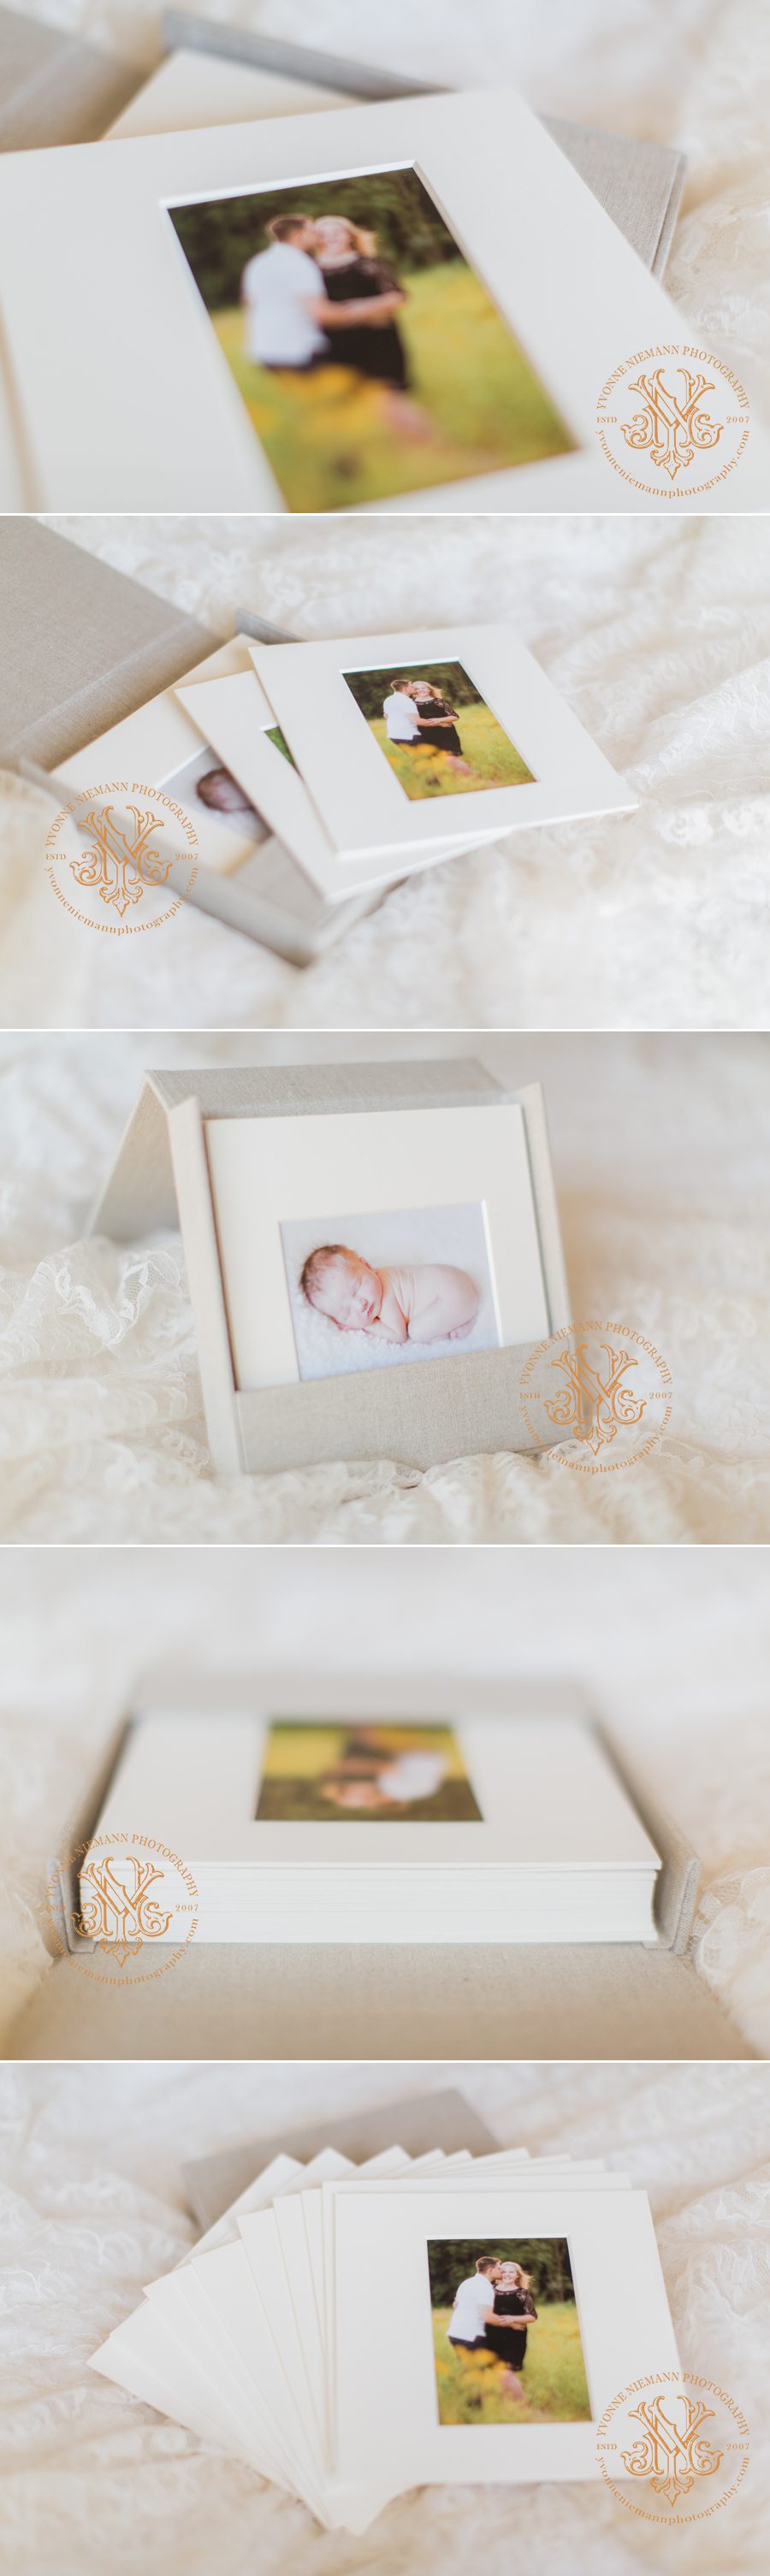 Timeless portraits in image box for  maternity and newborn photos offered by Athens, GA newborn photographer, Yvonne Niemann Photography.